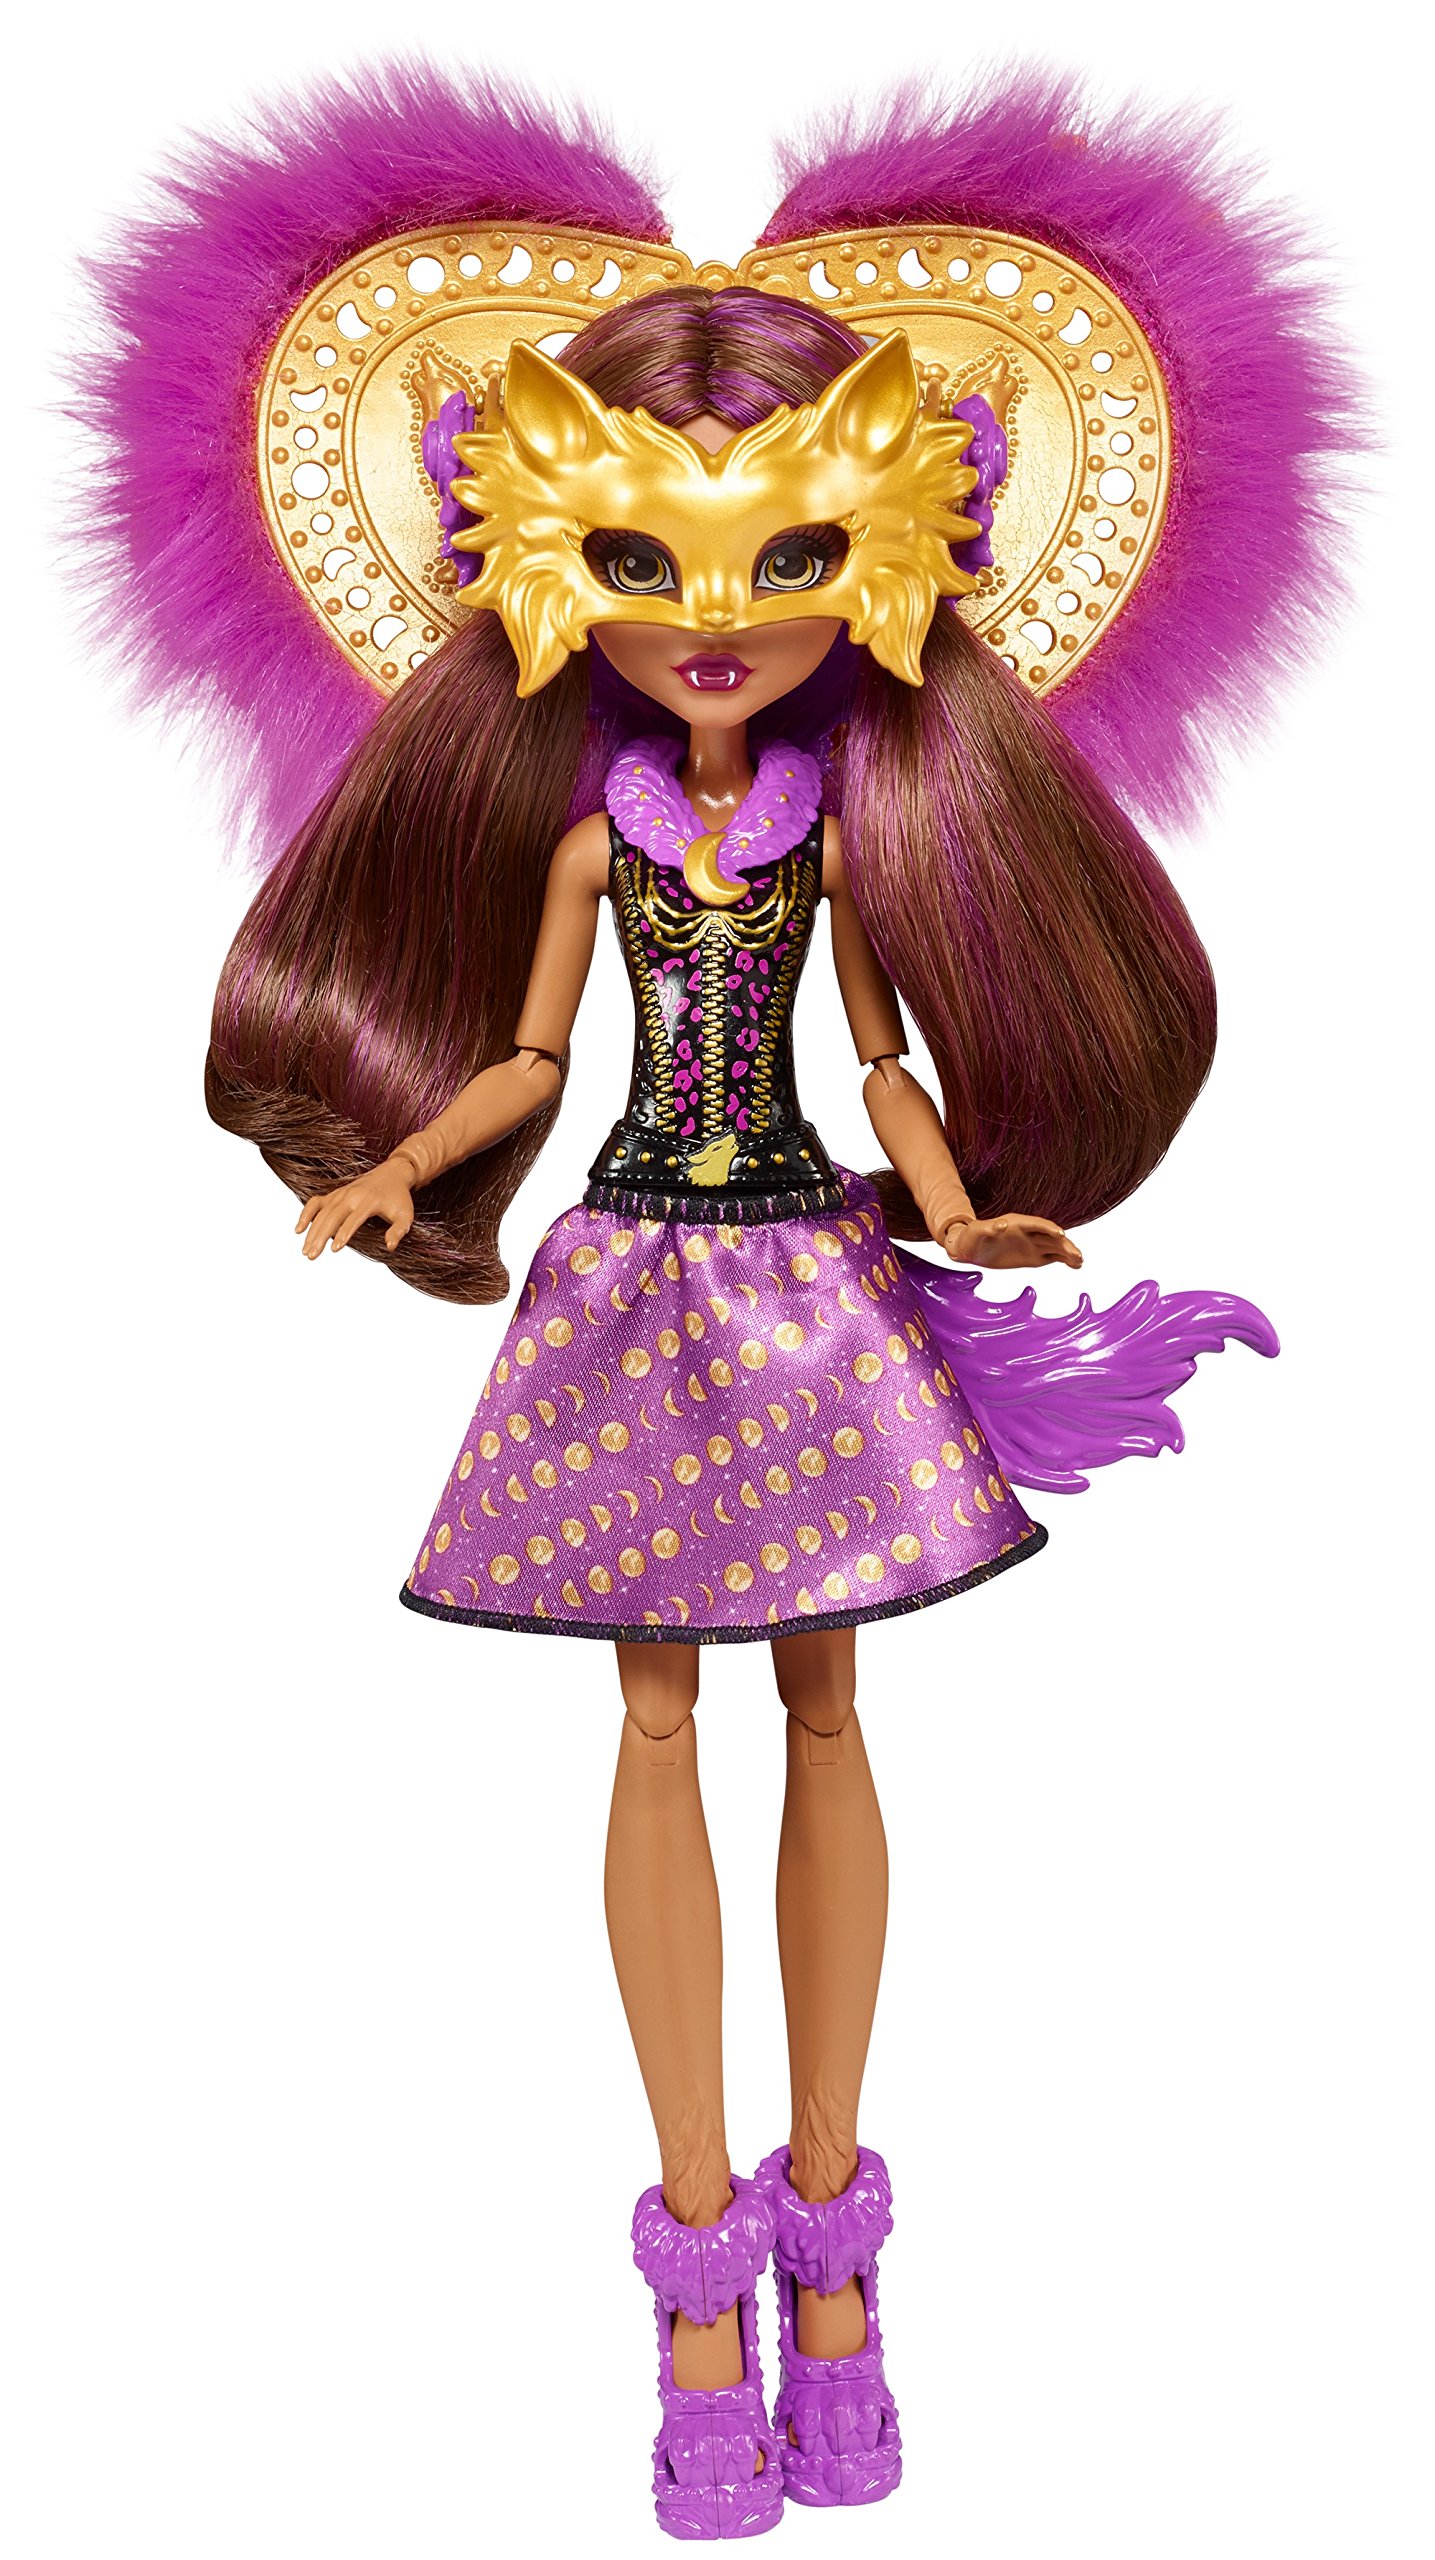 alex takasugi recommends pictures of clawdeen from monster high pic